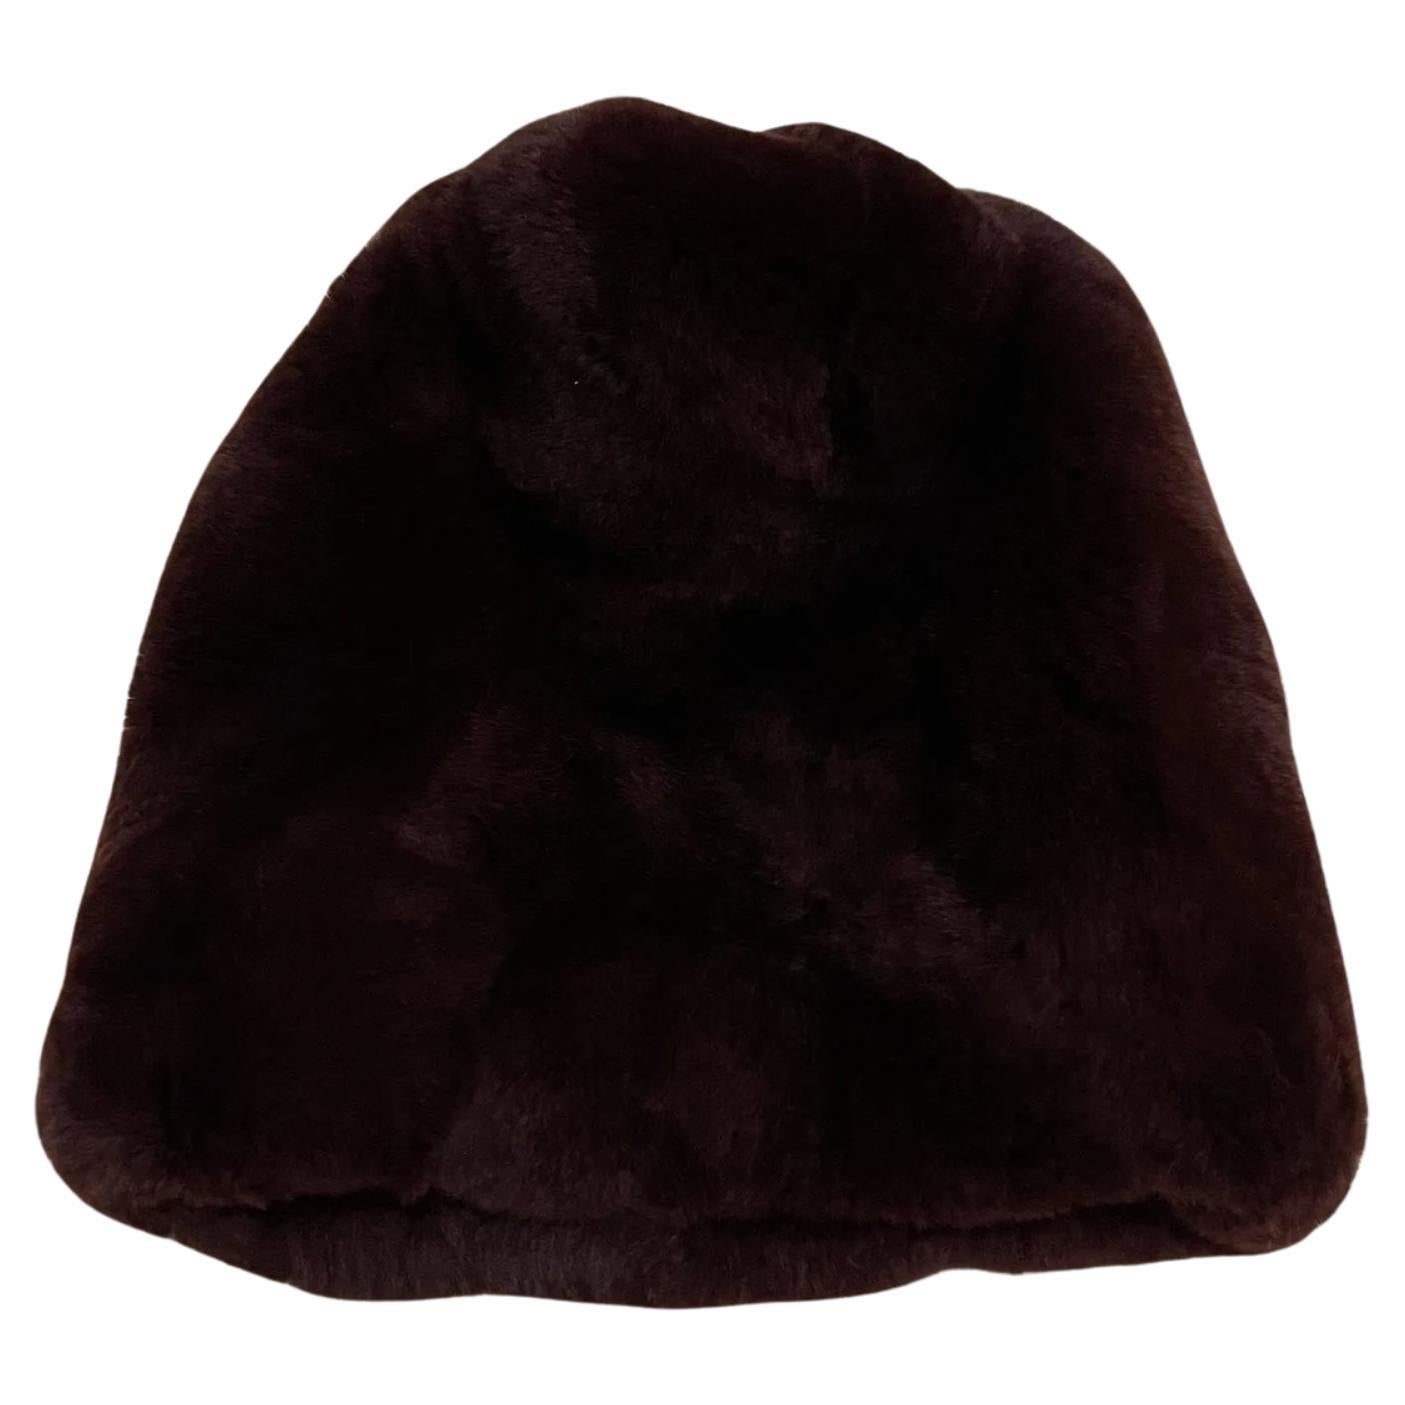 What is a fur hat called?